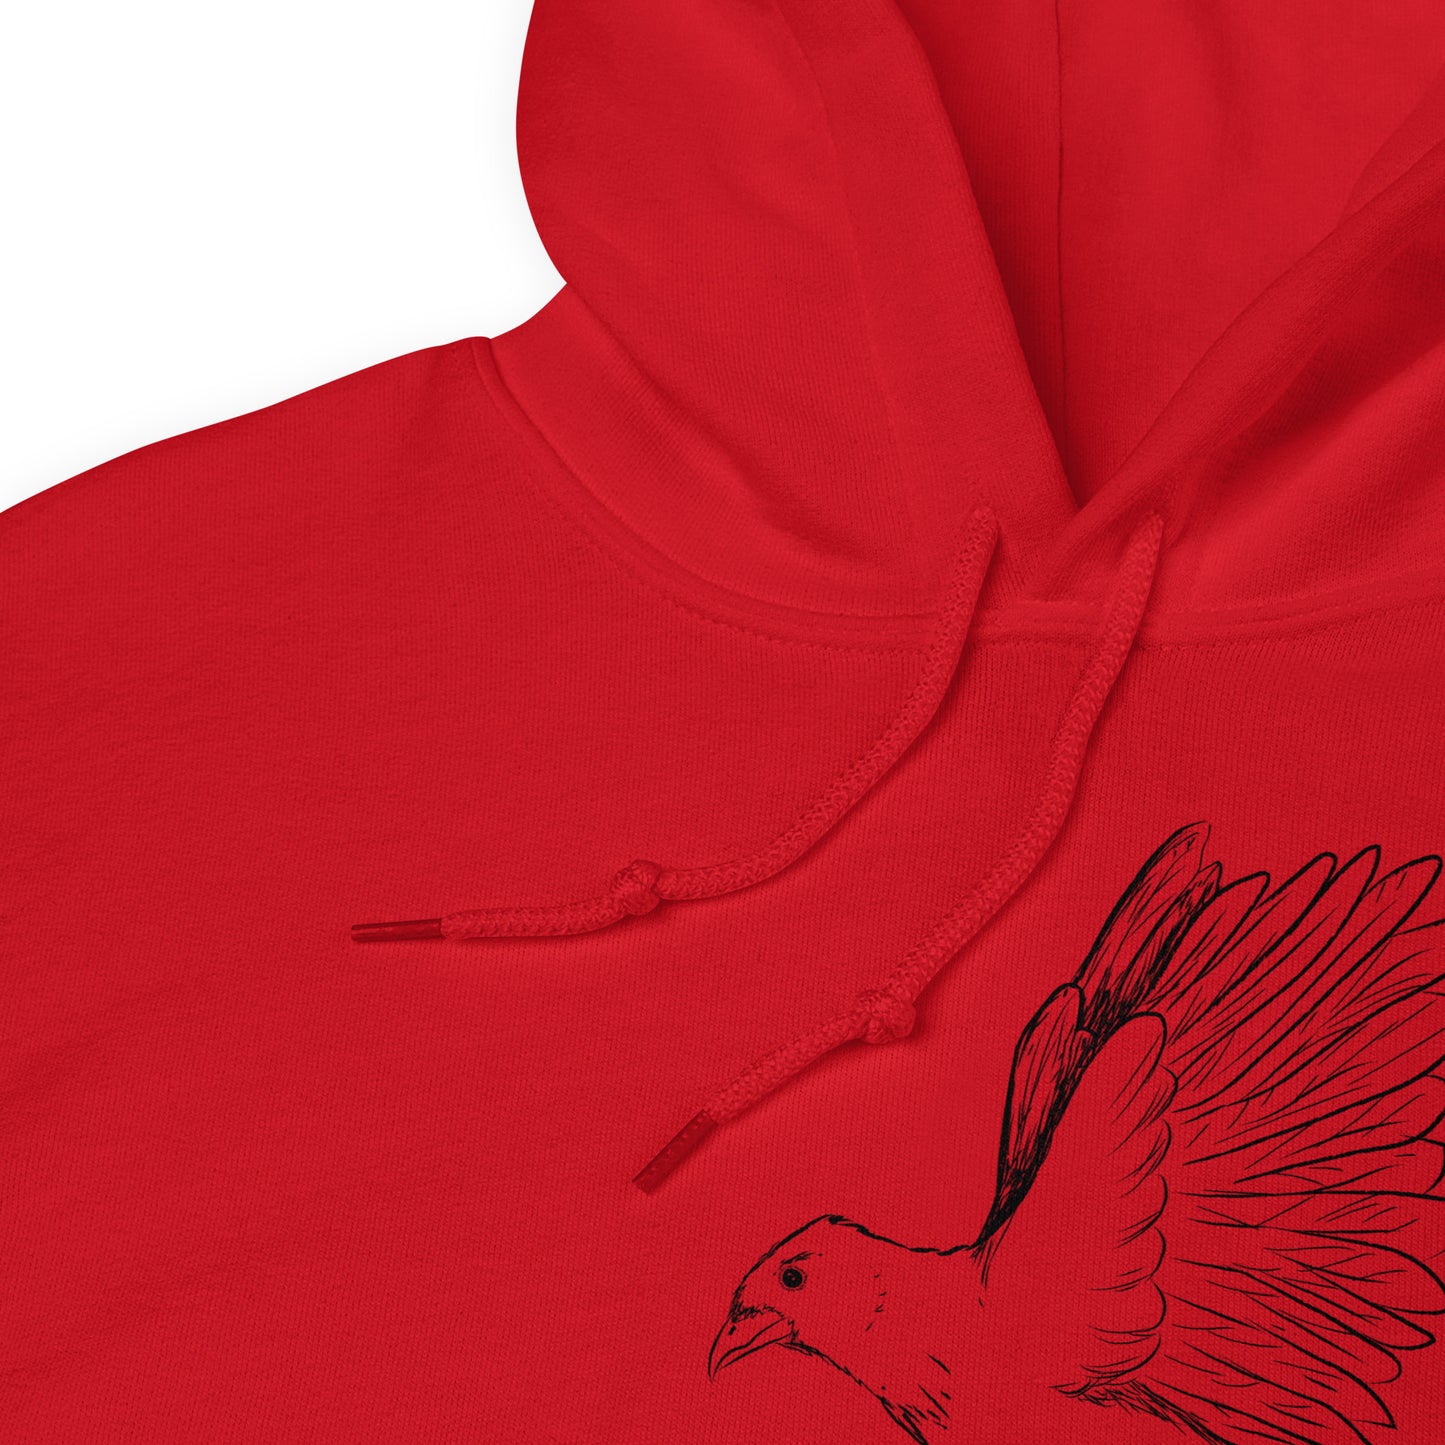 Red colored unisex Reflections hoodie. Features image of a crow with wings outstretched sitting on a sheep skull.  Has a front pouch pocket and double lined hood. Detail view of hood drawstring ties.